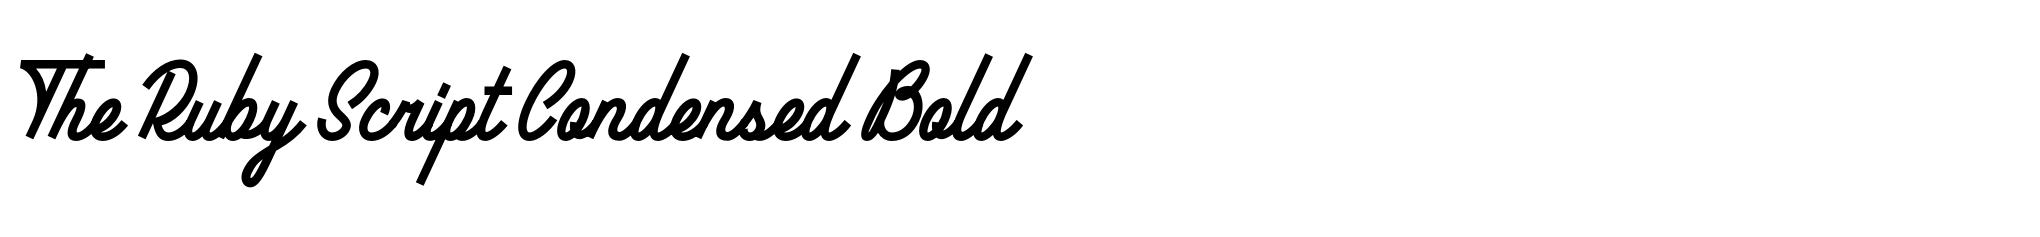 The Ruby Script Condensed Bold image